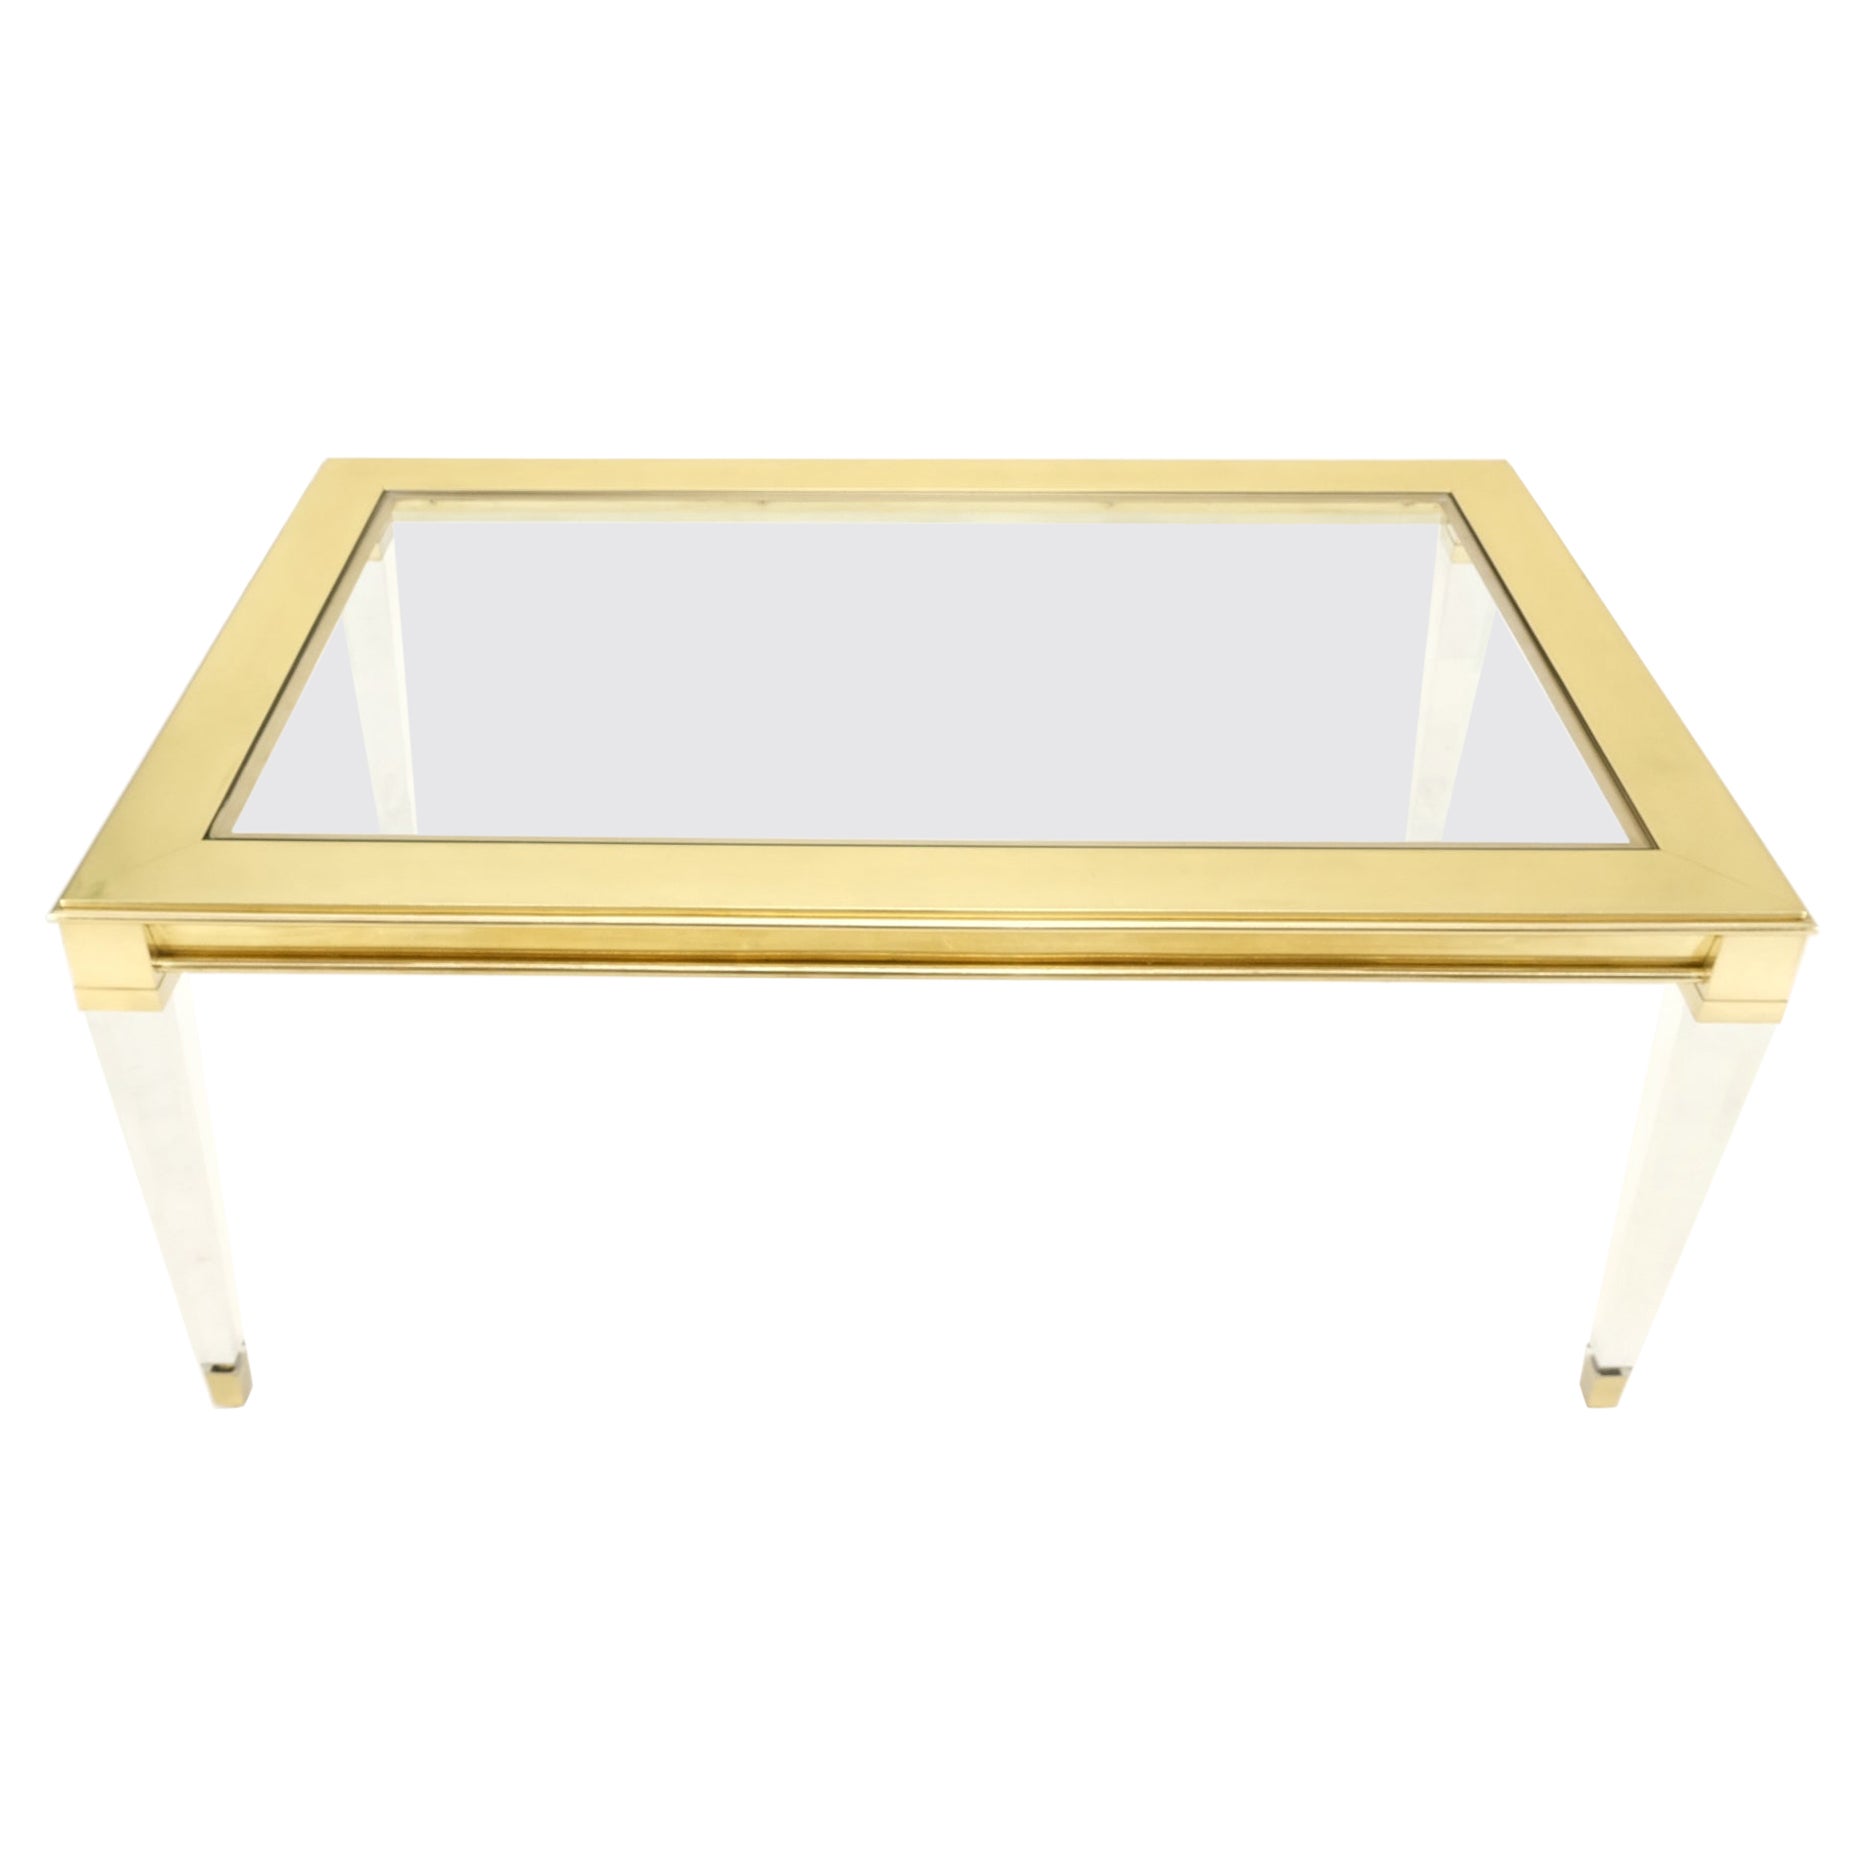 Large Mid Century Modern c.1970's Lucite Brass Glass Top Rectangle Coffee Table 